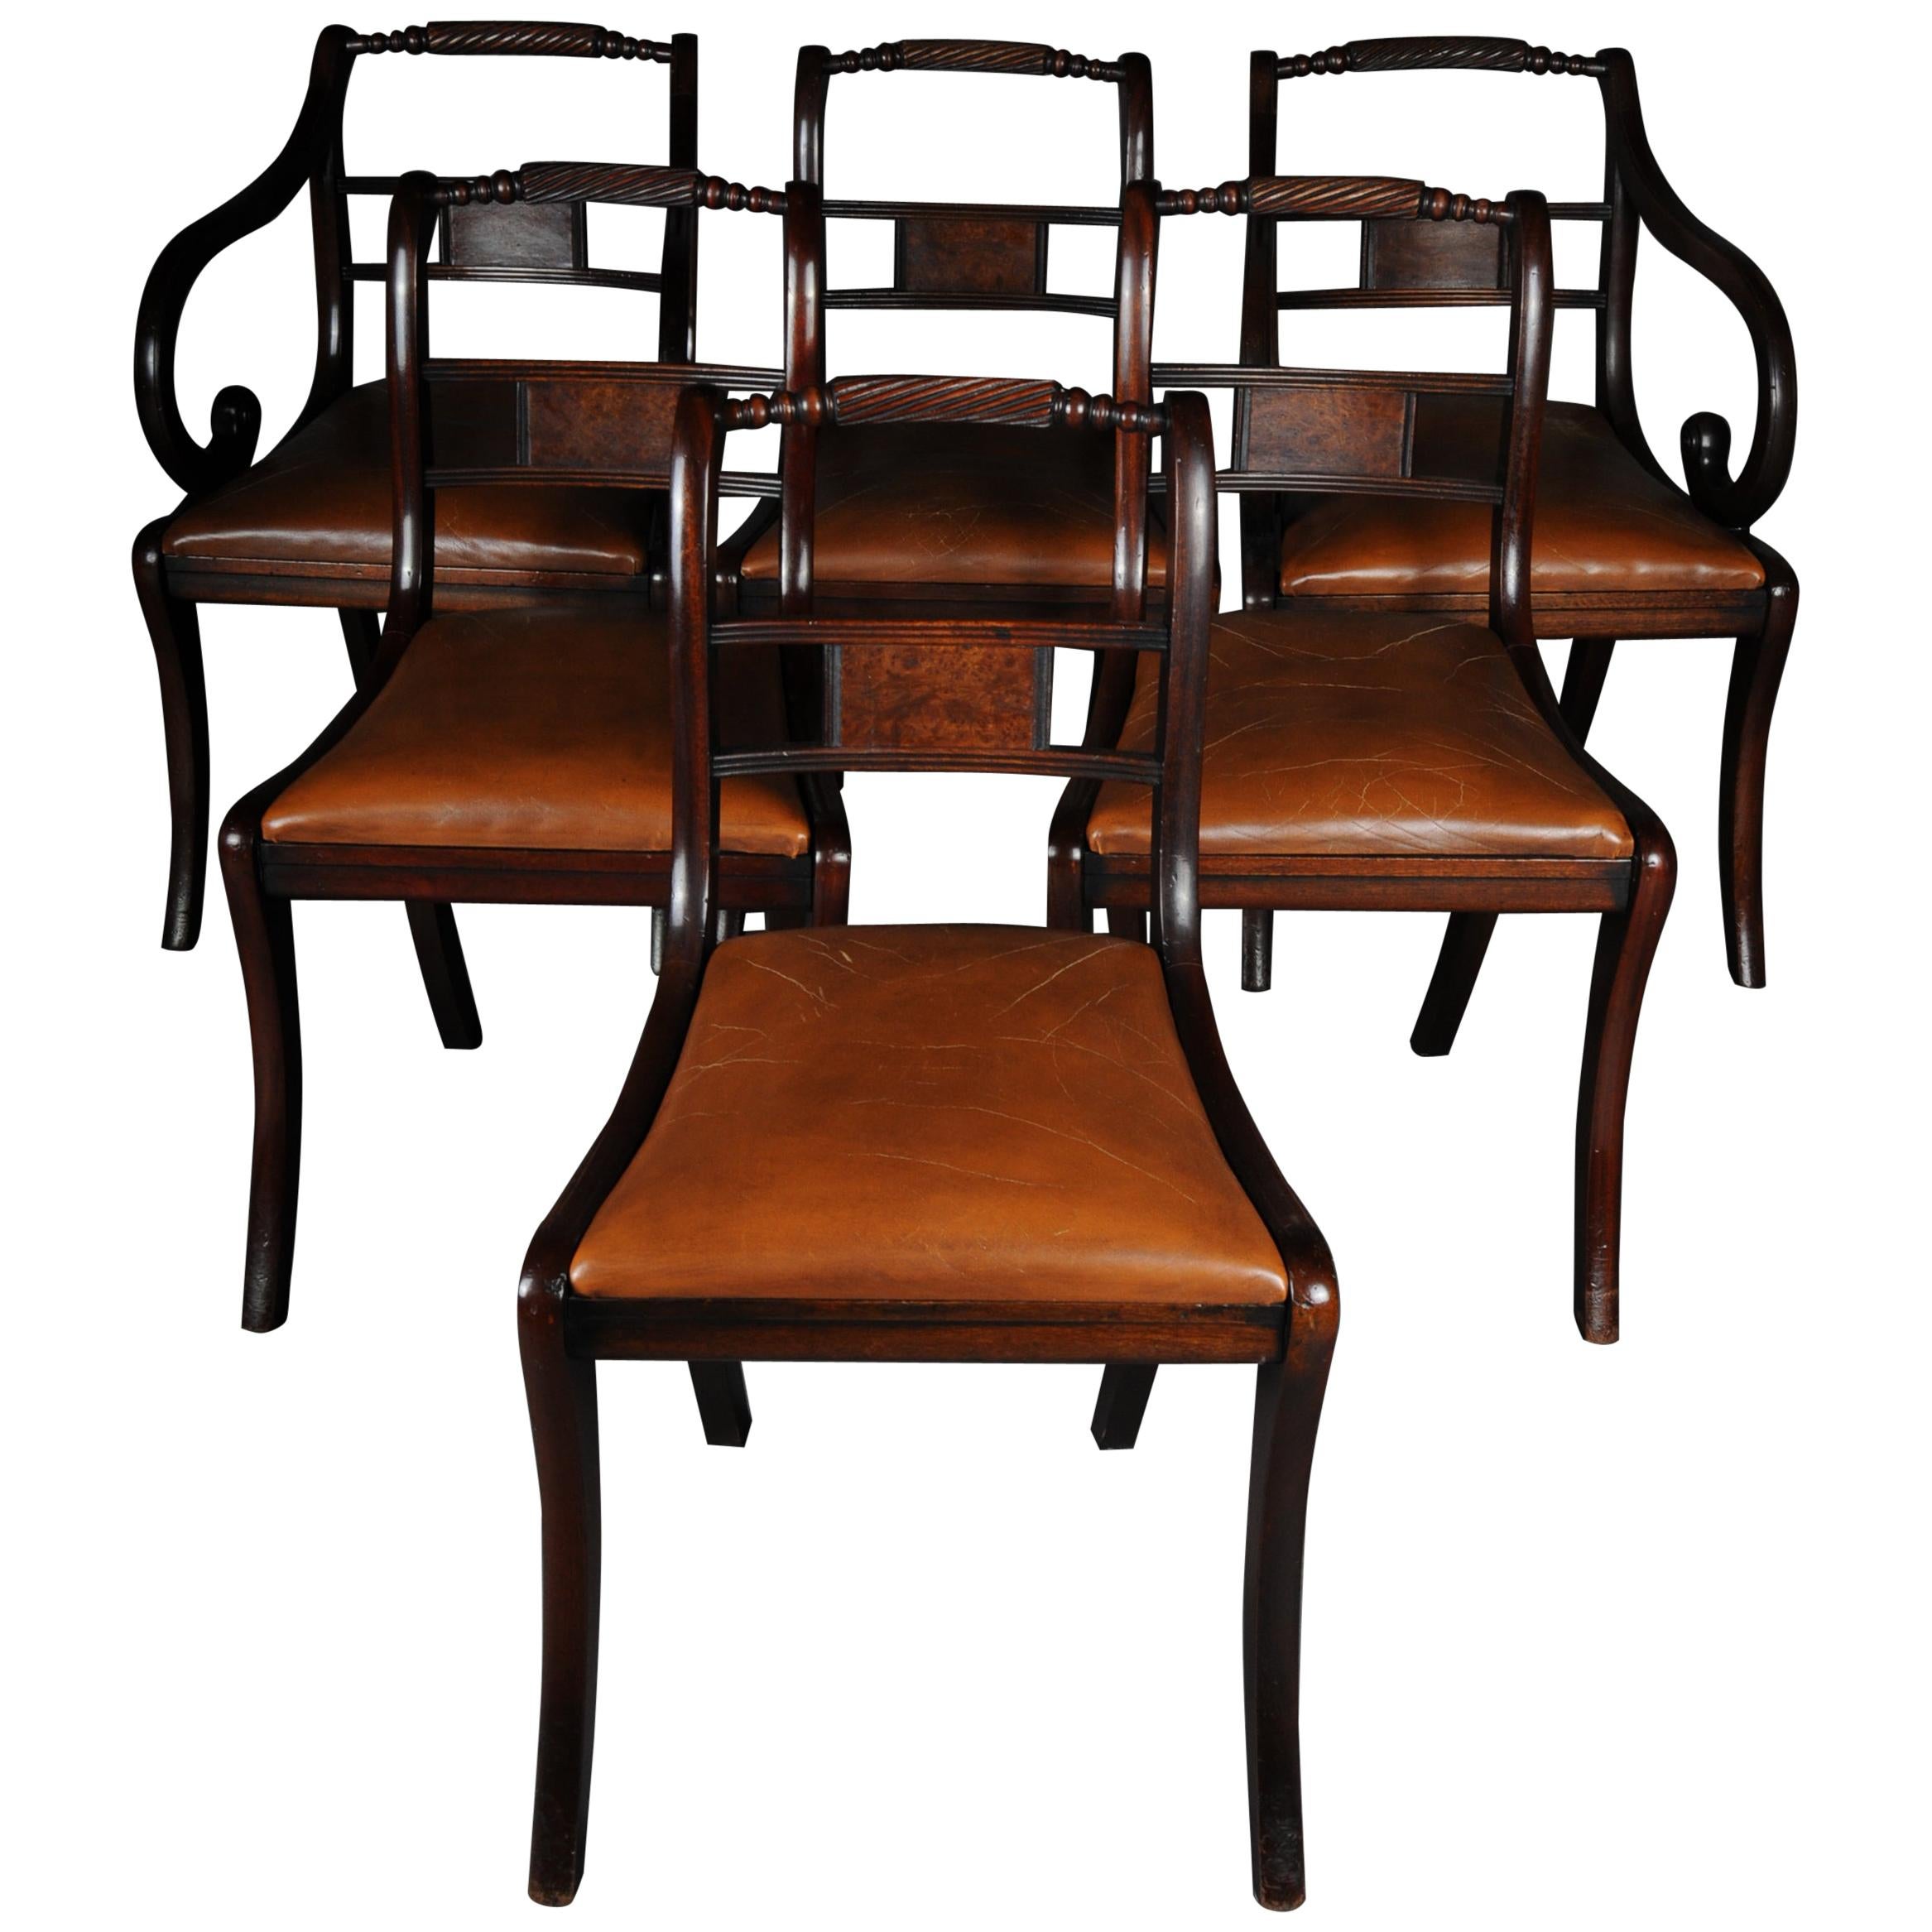 Set of 6 Regency English Chairs or Armchairs, 20th Century